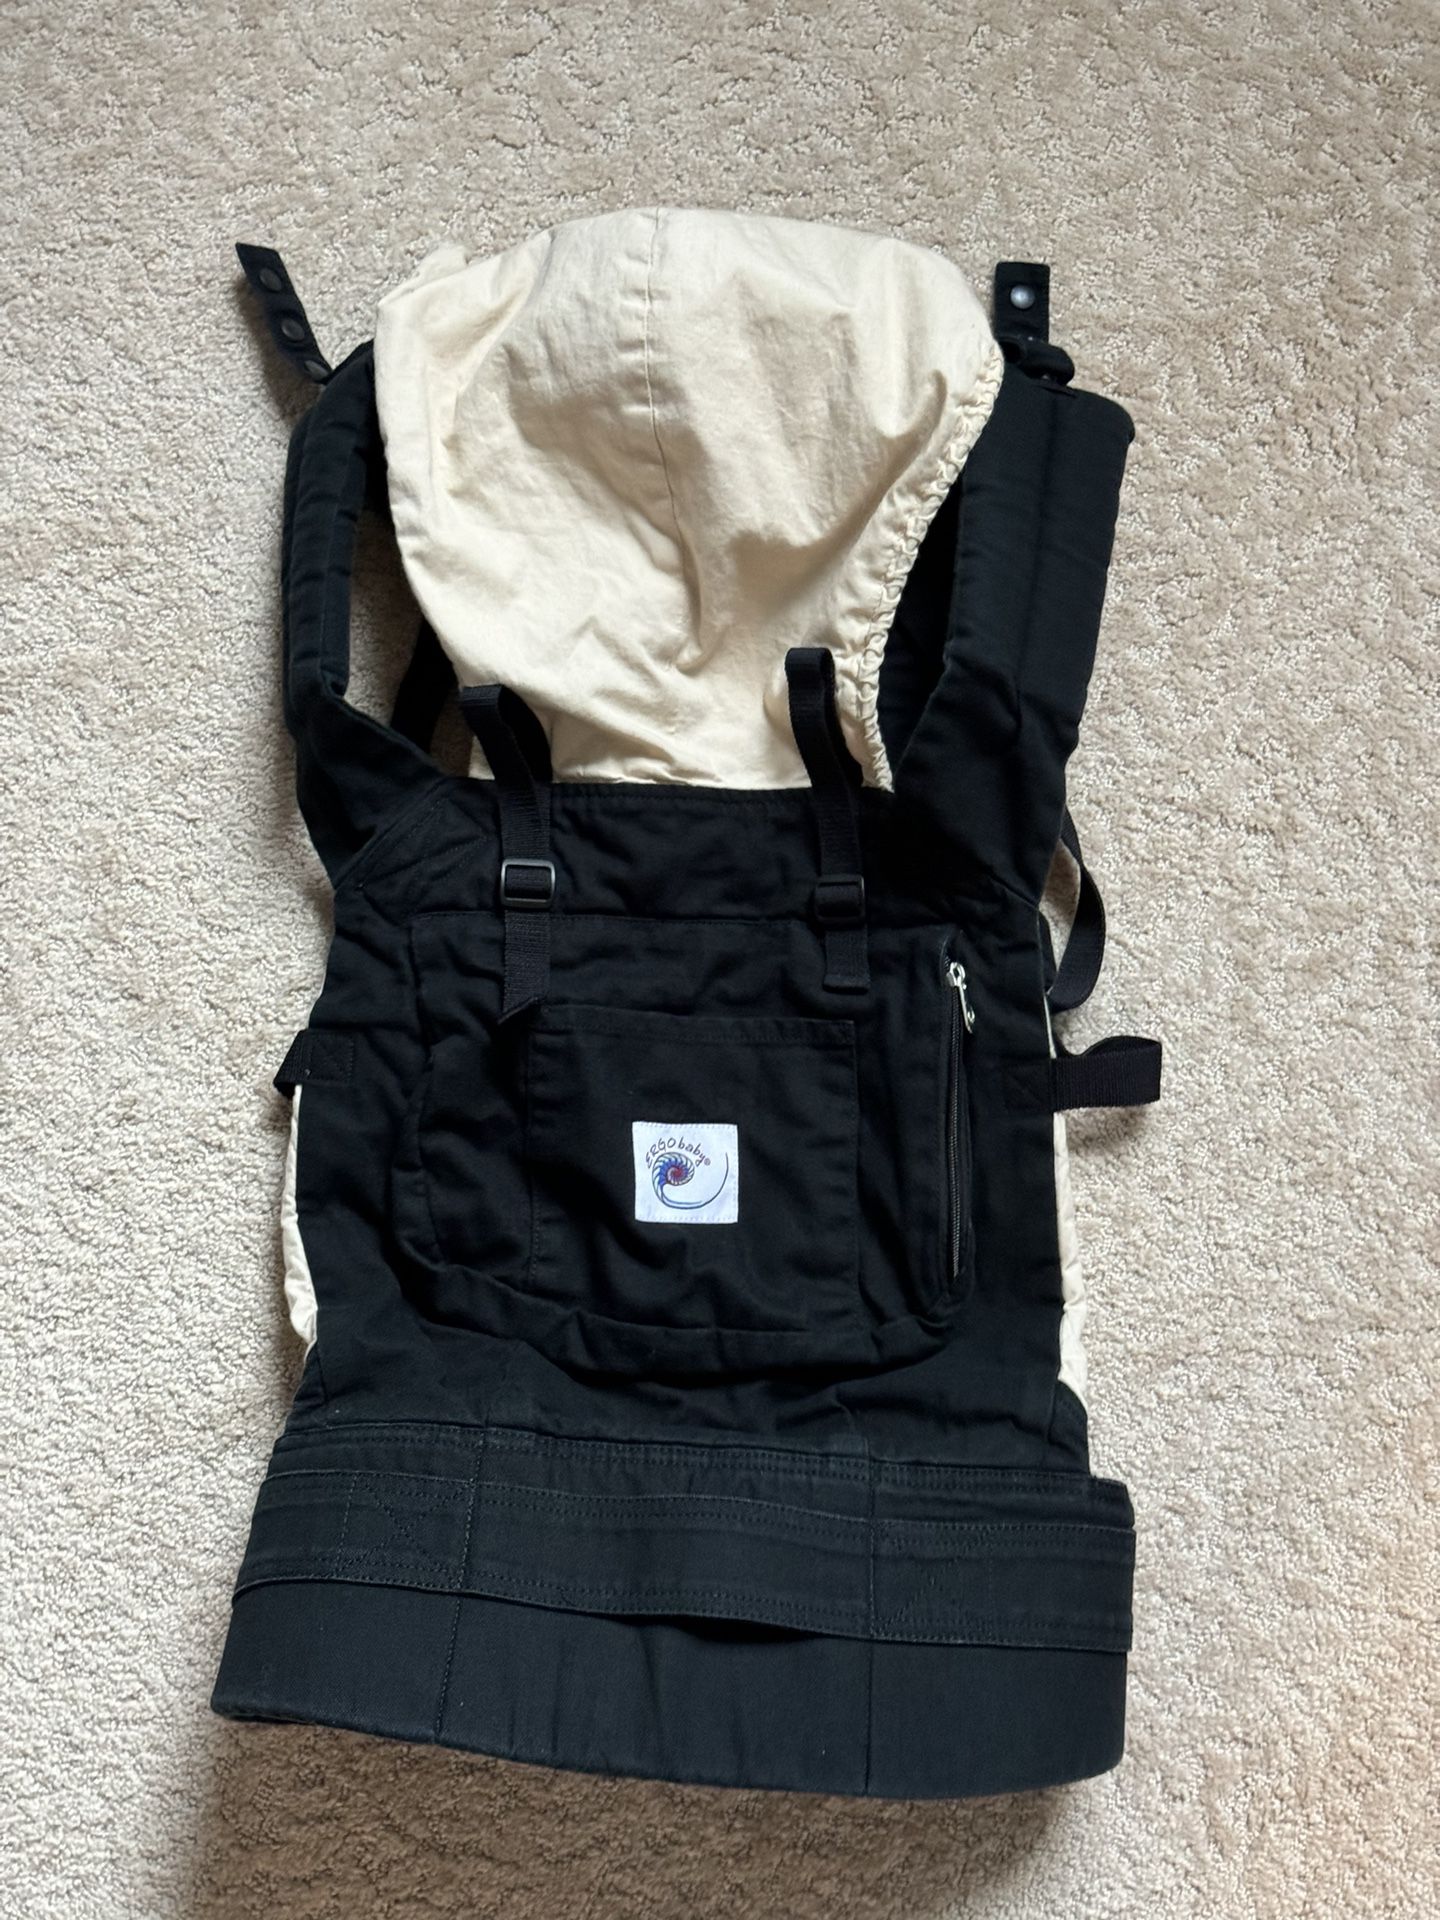  Ergobaby Baby Carrier With Infant Insert 